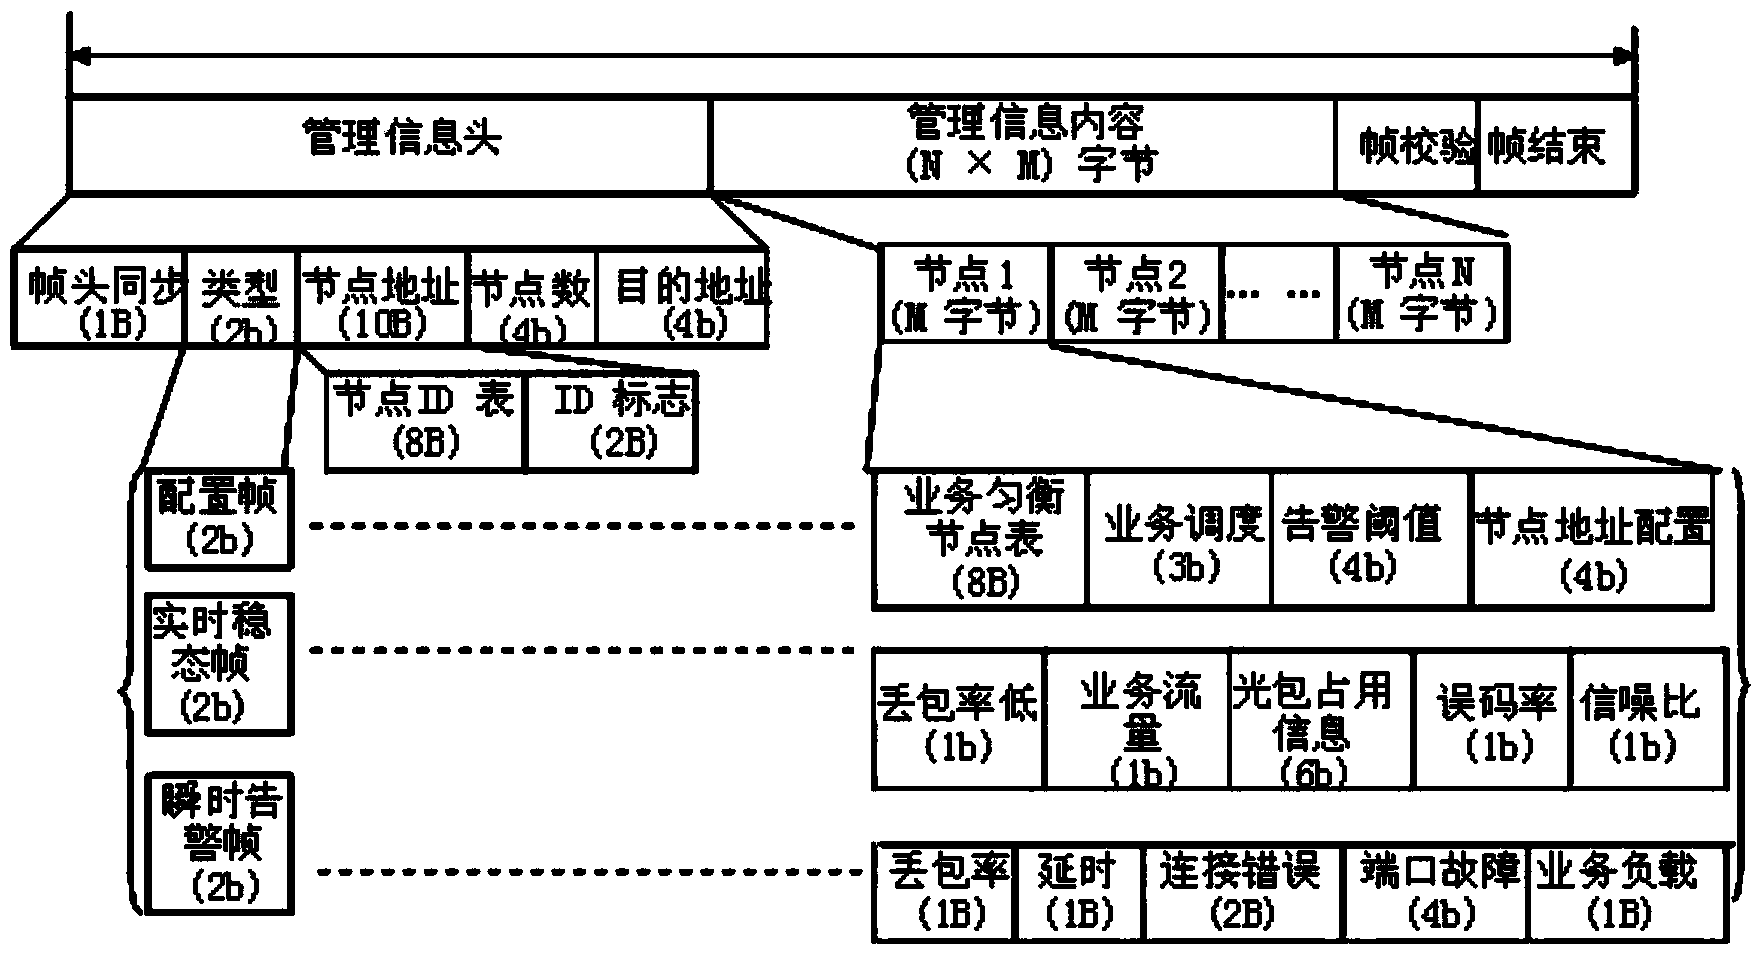 Method for achieving dynamic allocation of resources of asynchronism optical packet switching network